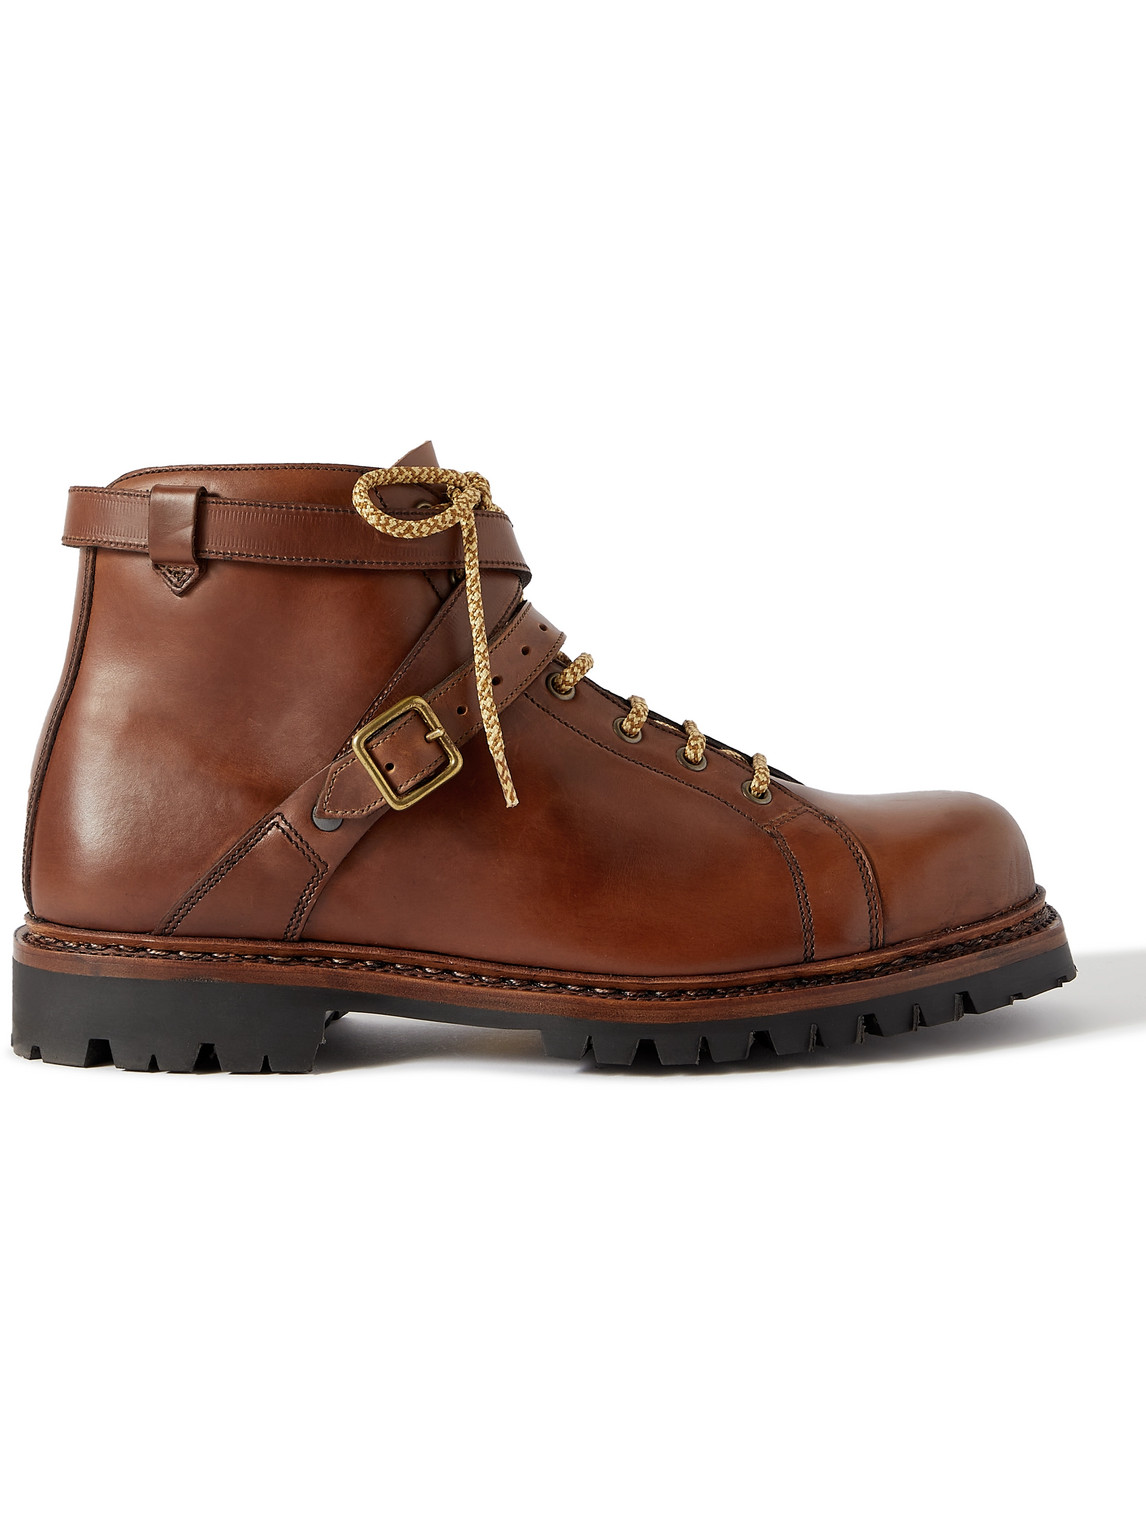 George Cleverley Edmund Buckled Leather Boots In Brown